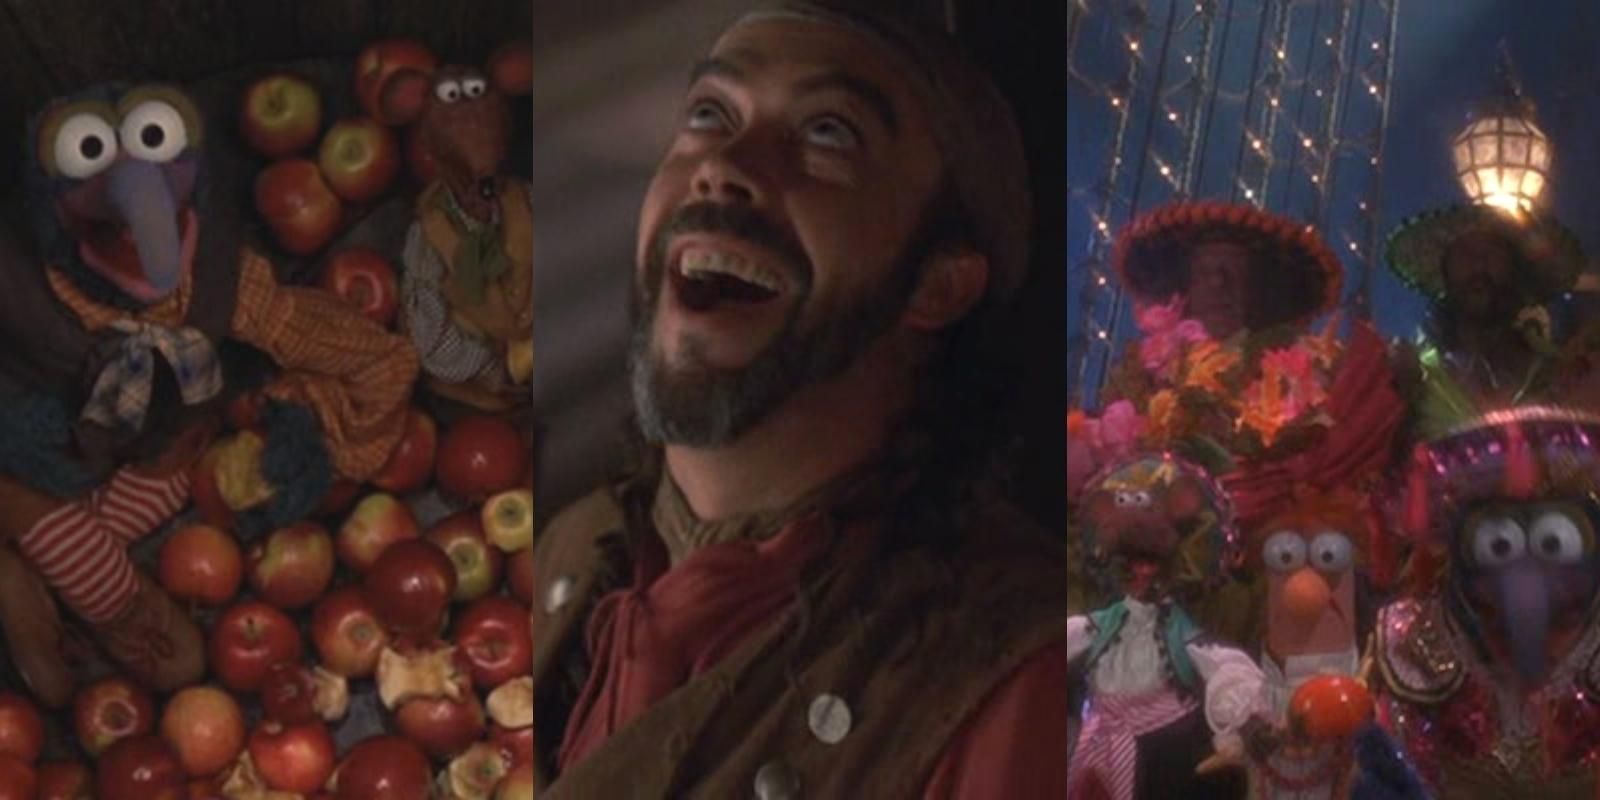 Split image of Rizzo and Gonzo hiding in apples, Long John Silver laughing, and the crew having cabin fever in Muppet Treasure Island